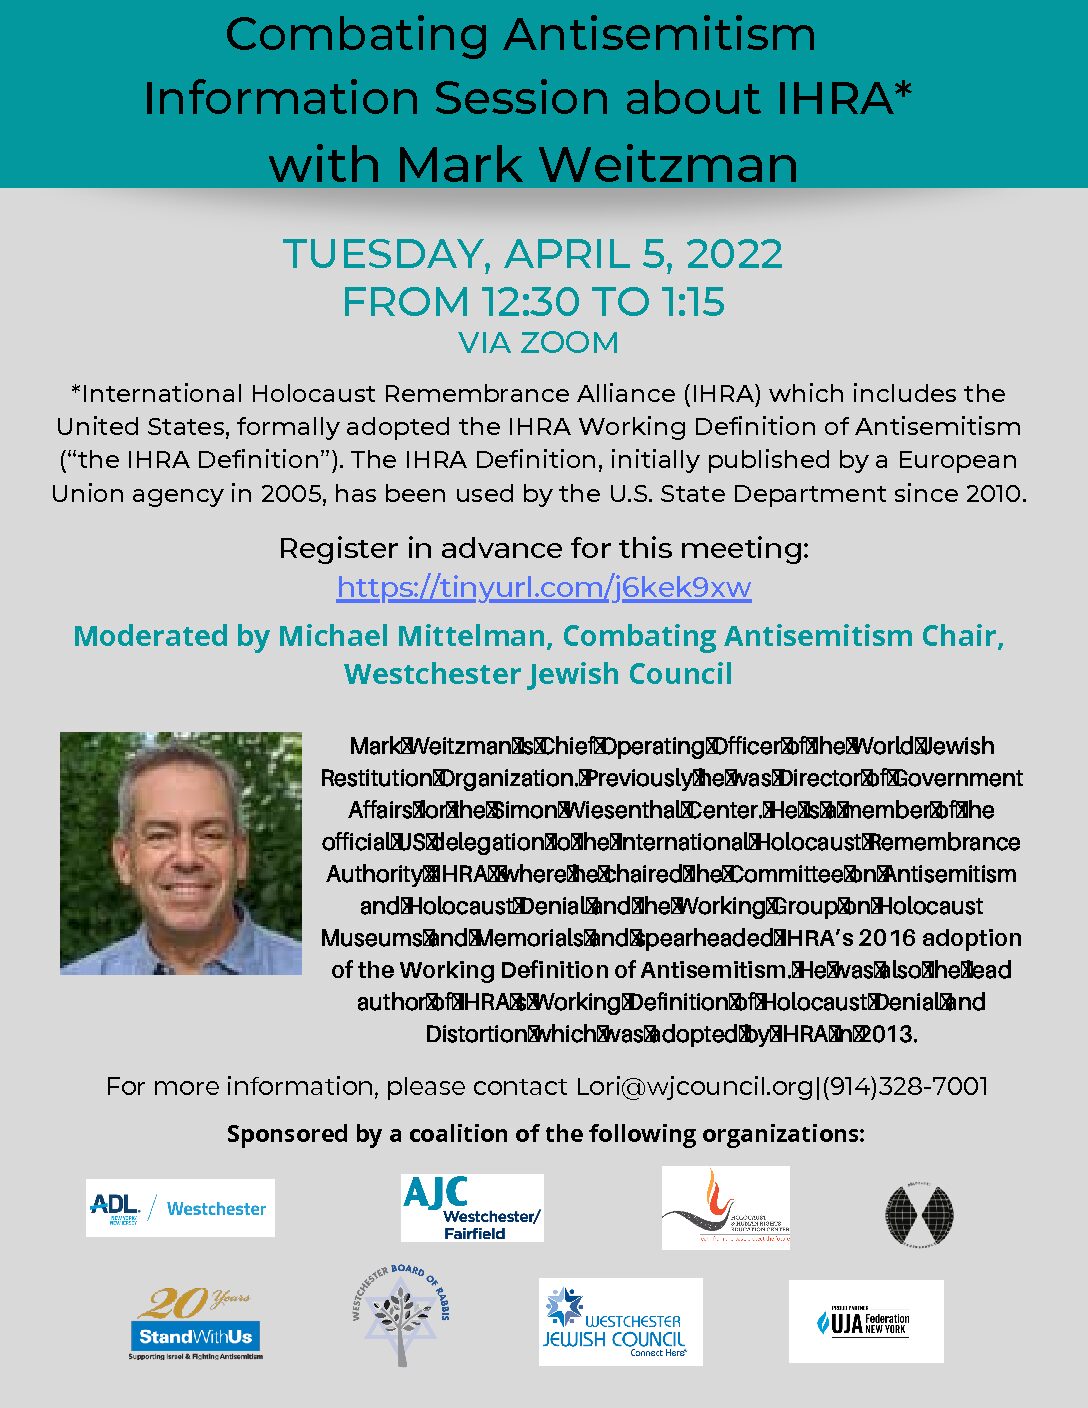 Combating Antisemitism Information Session about IHRA with Mark Weitzman